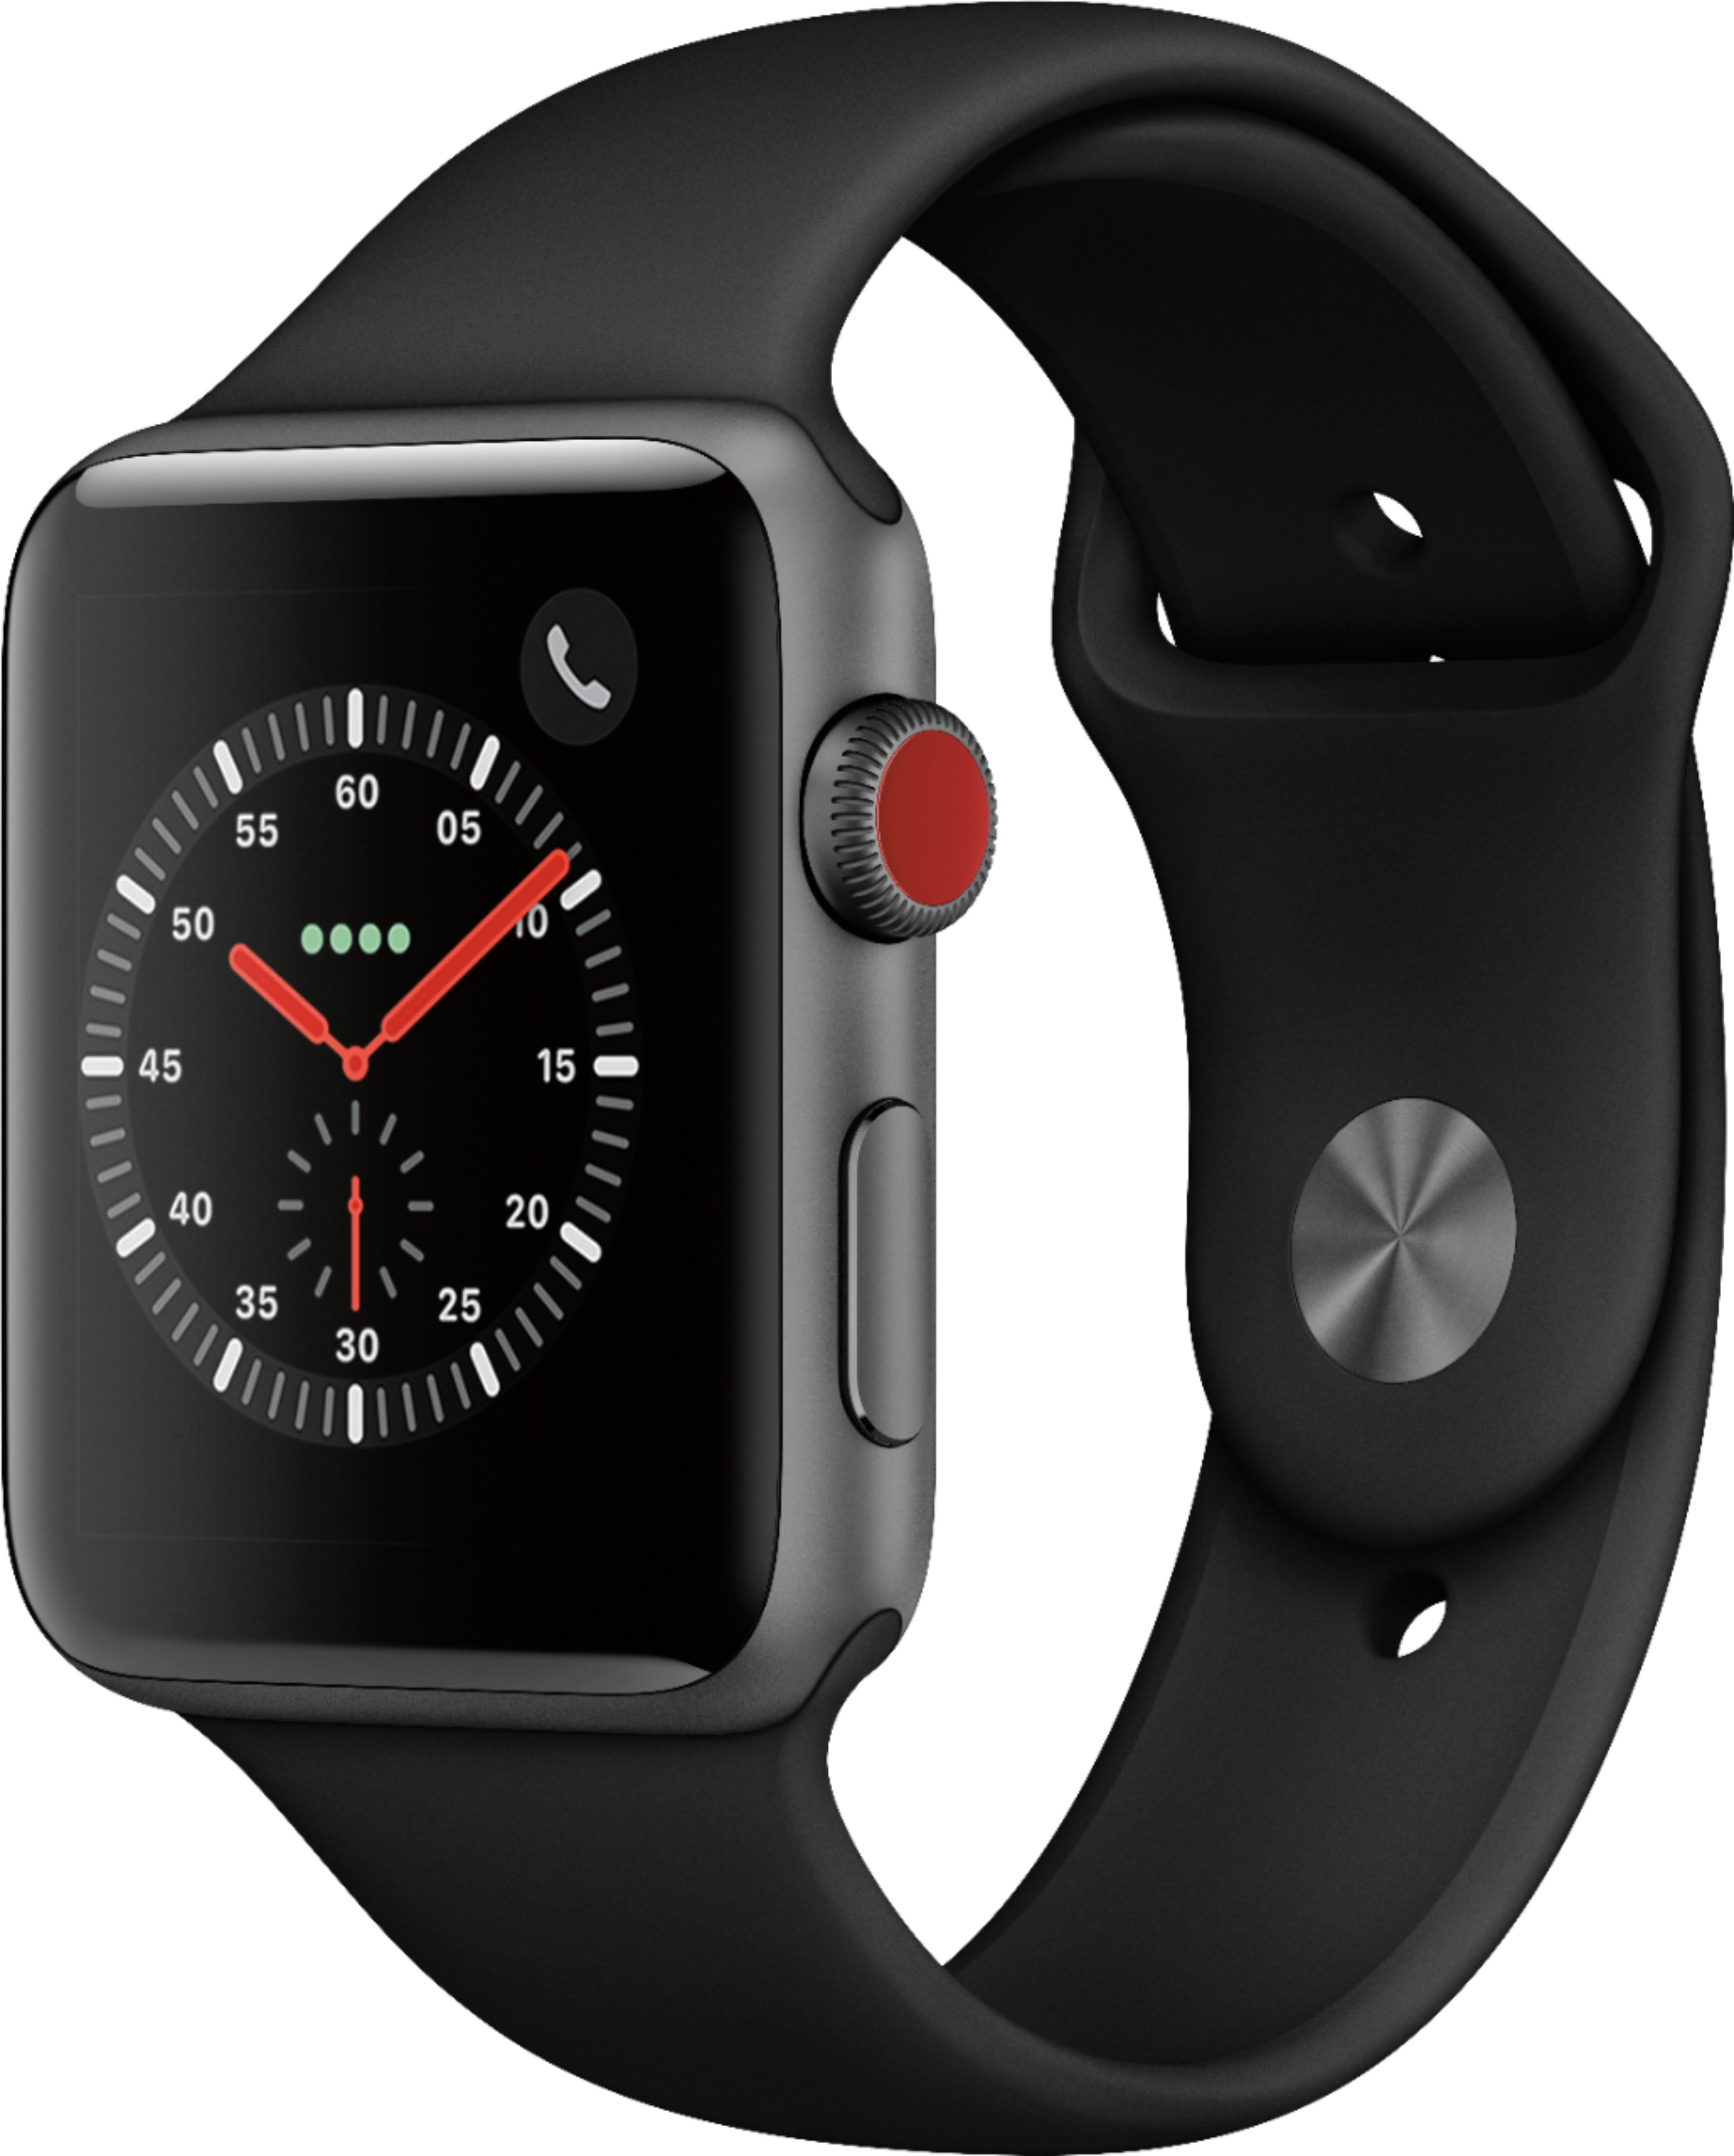 Apple - GSRFApple Watch Series 3 (GPS+Cellular) 42mm Space Gray Aluminum Case with Black Sport Band - Space Gray Aluminum